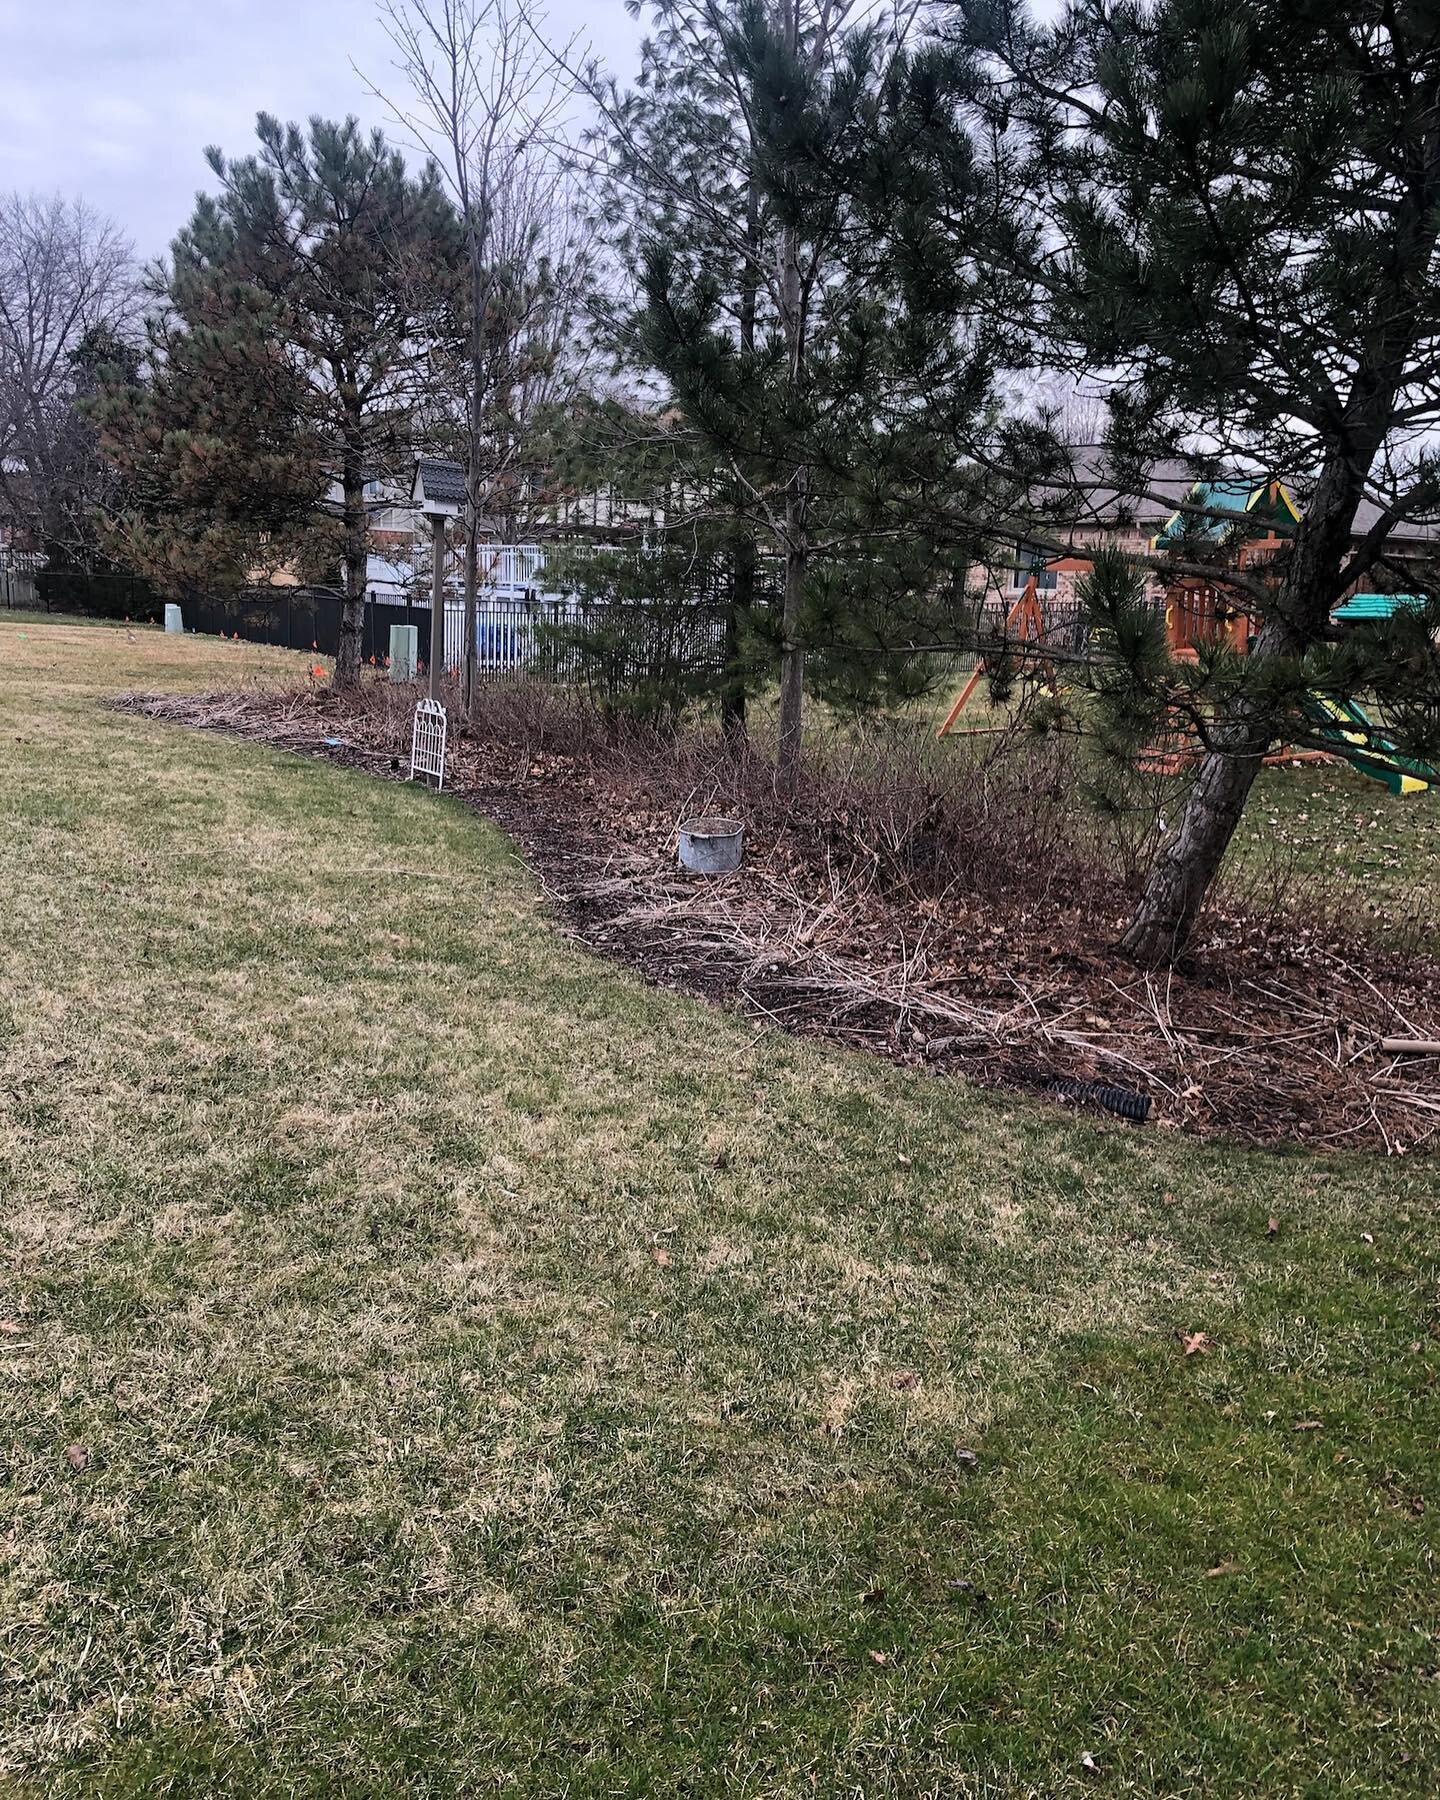 Cleaned up and re mulched the common area&rsquo;s for these clients 
(586)556-2146
Enhanced-landscaping.com 
#landscape #landscapedesign #landscapephotography #gardenmaintenence #garden #gardening #gardendesign #gardeningtips #gardeninglife #weeding 